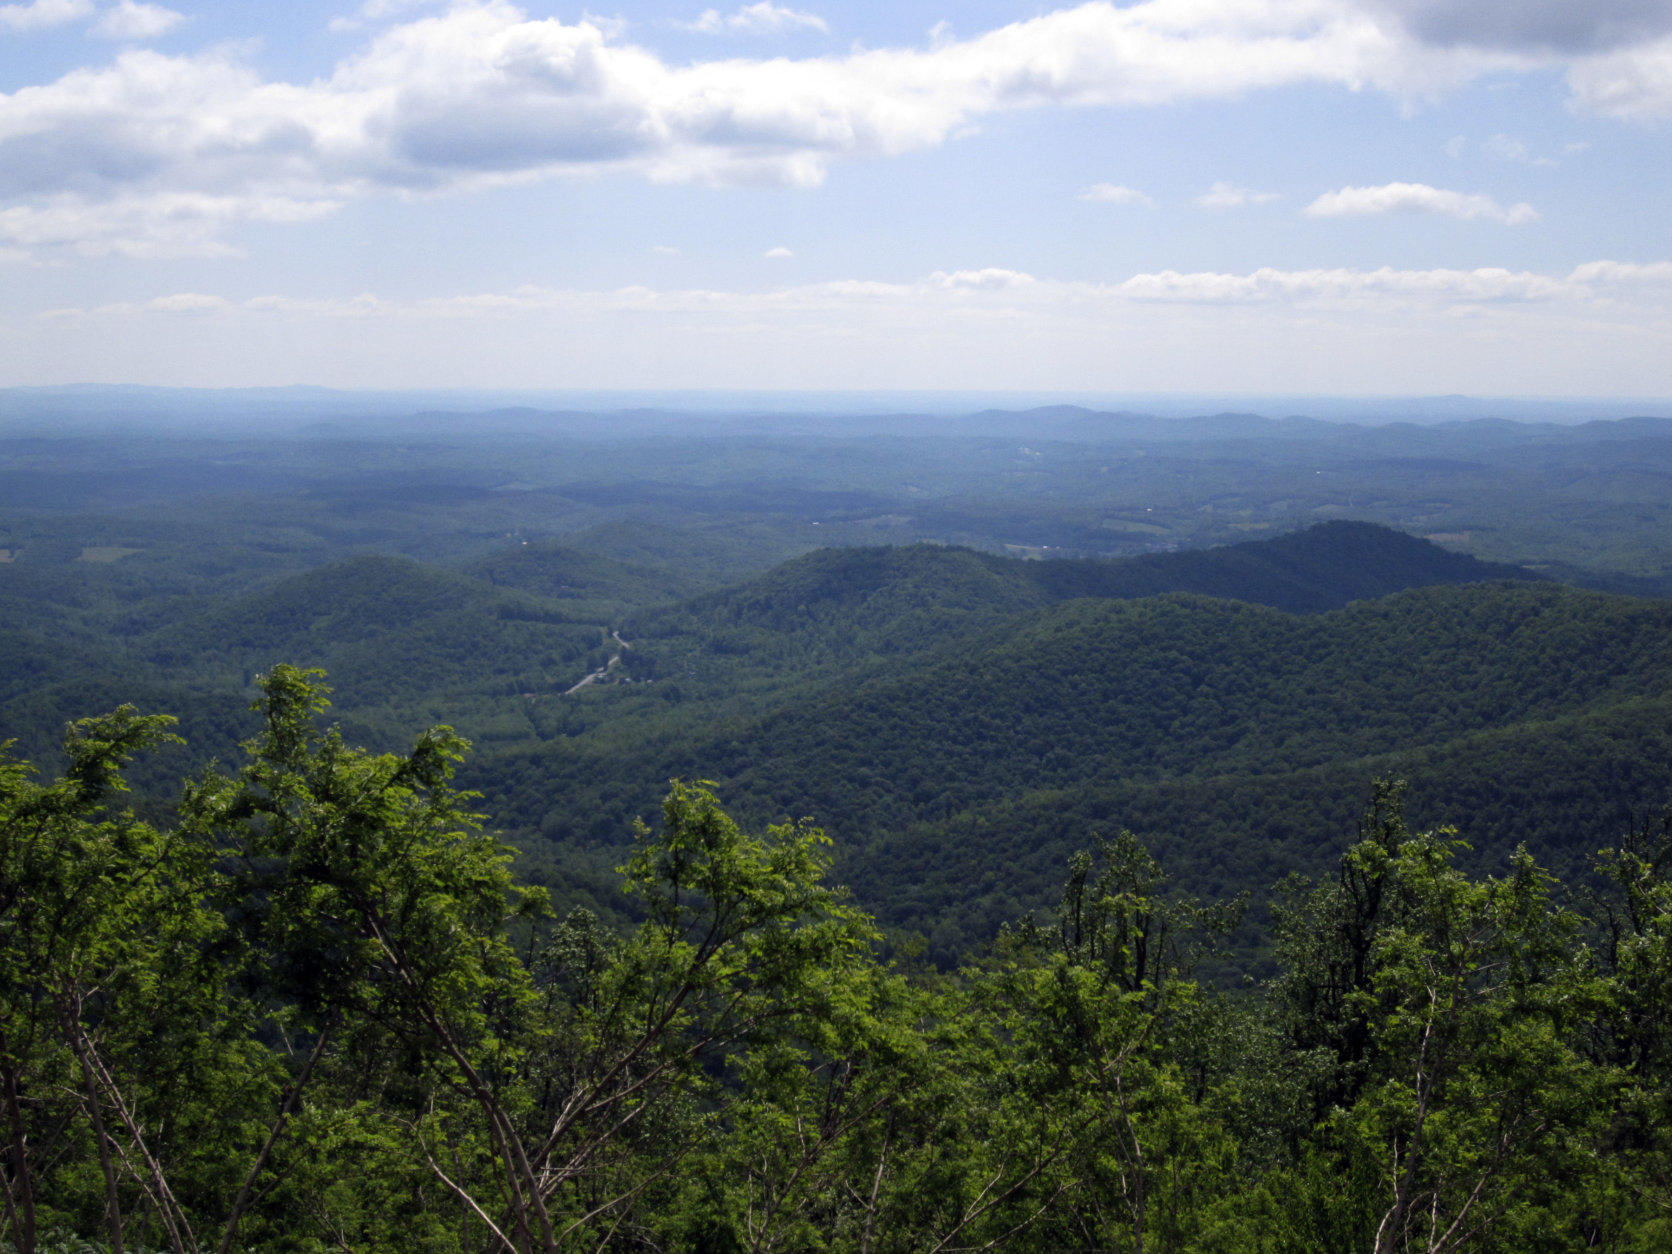 This Wednesday, May 9, 2010 photo shows the view from an overlook along the Blue Ridge Parkway near Rocky Knob in Floyd, Va. (AP Photo/Zinie Sampson)